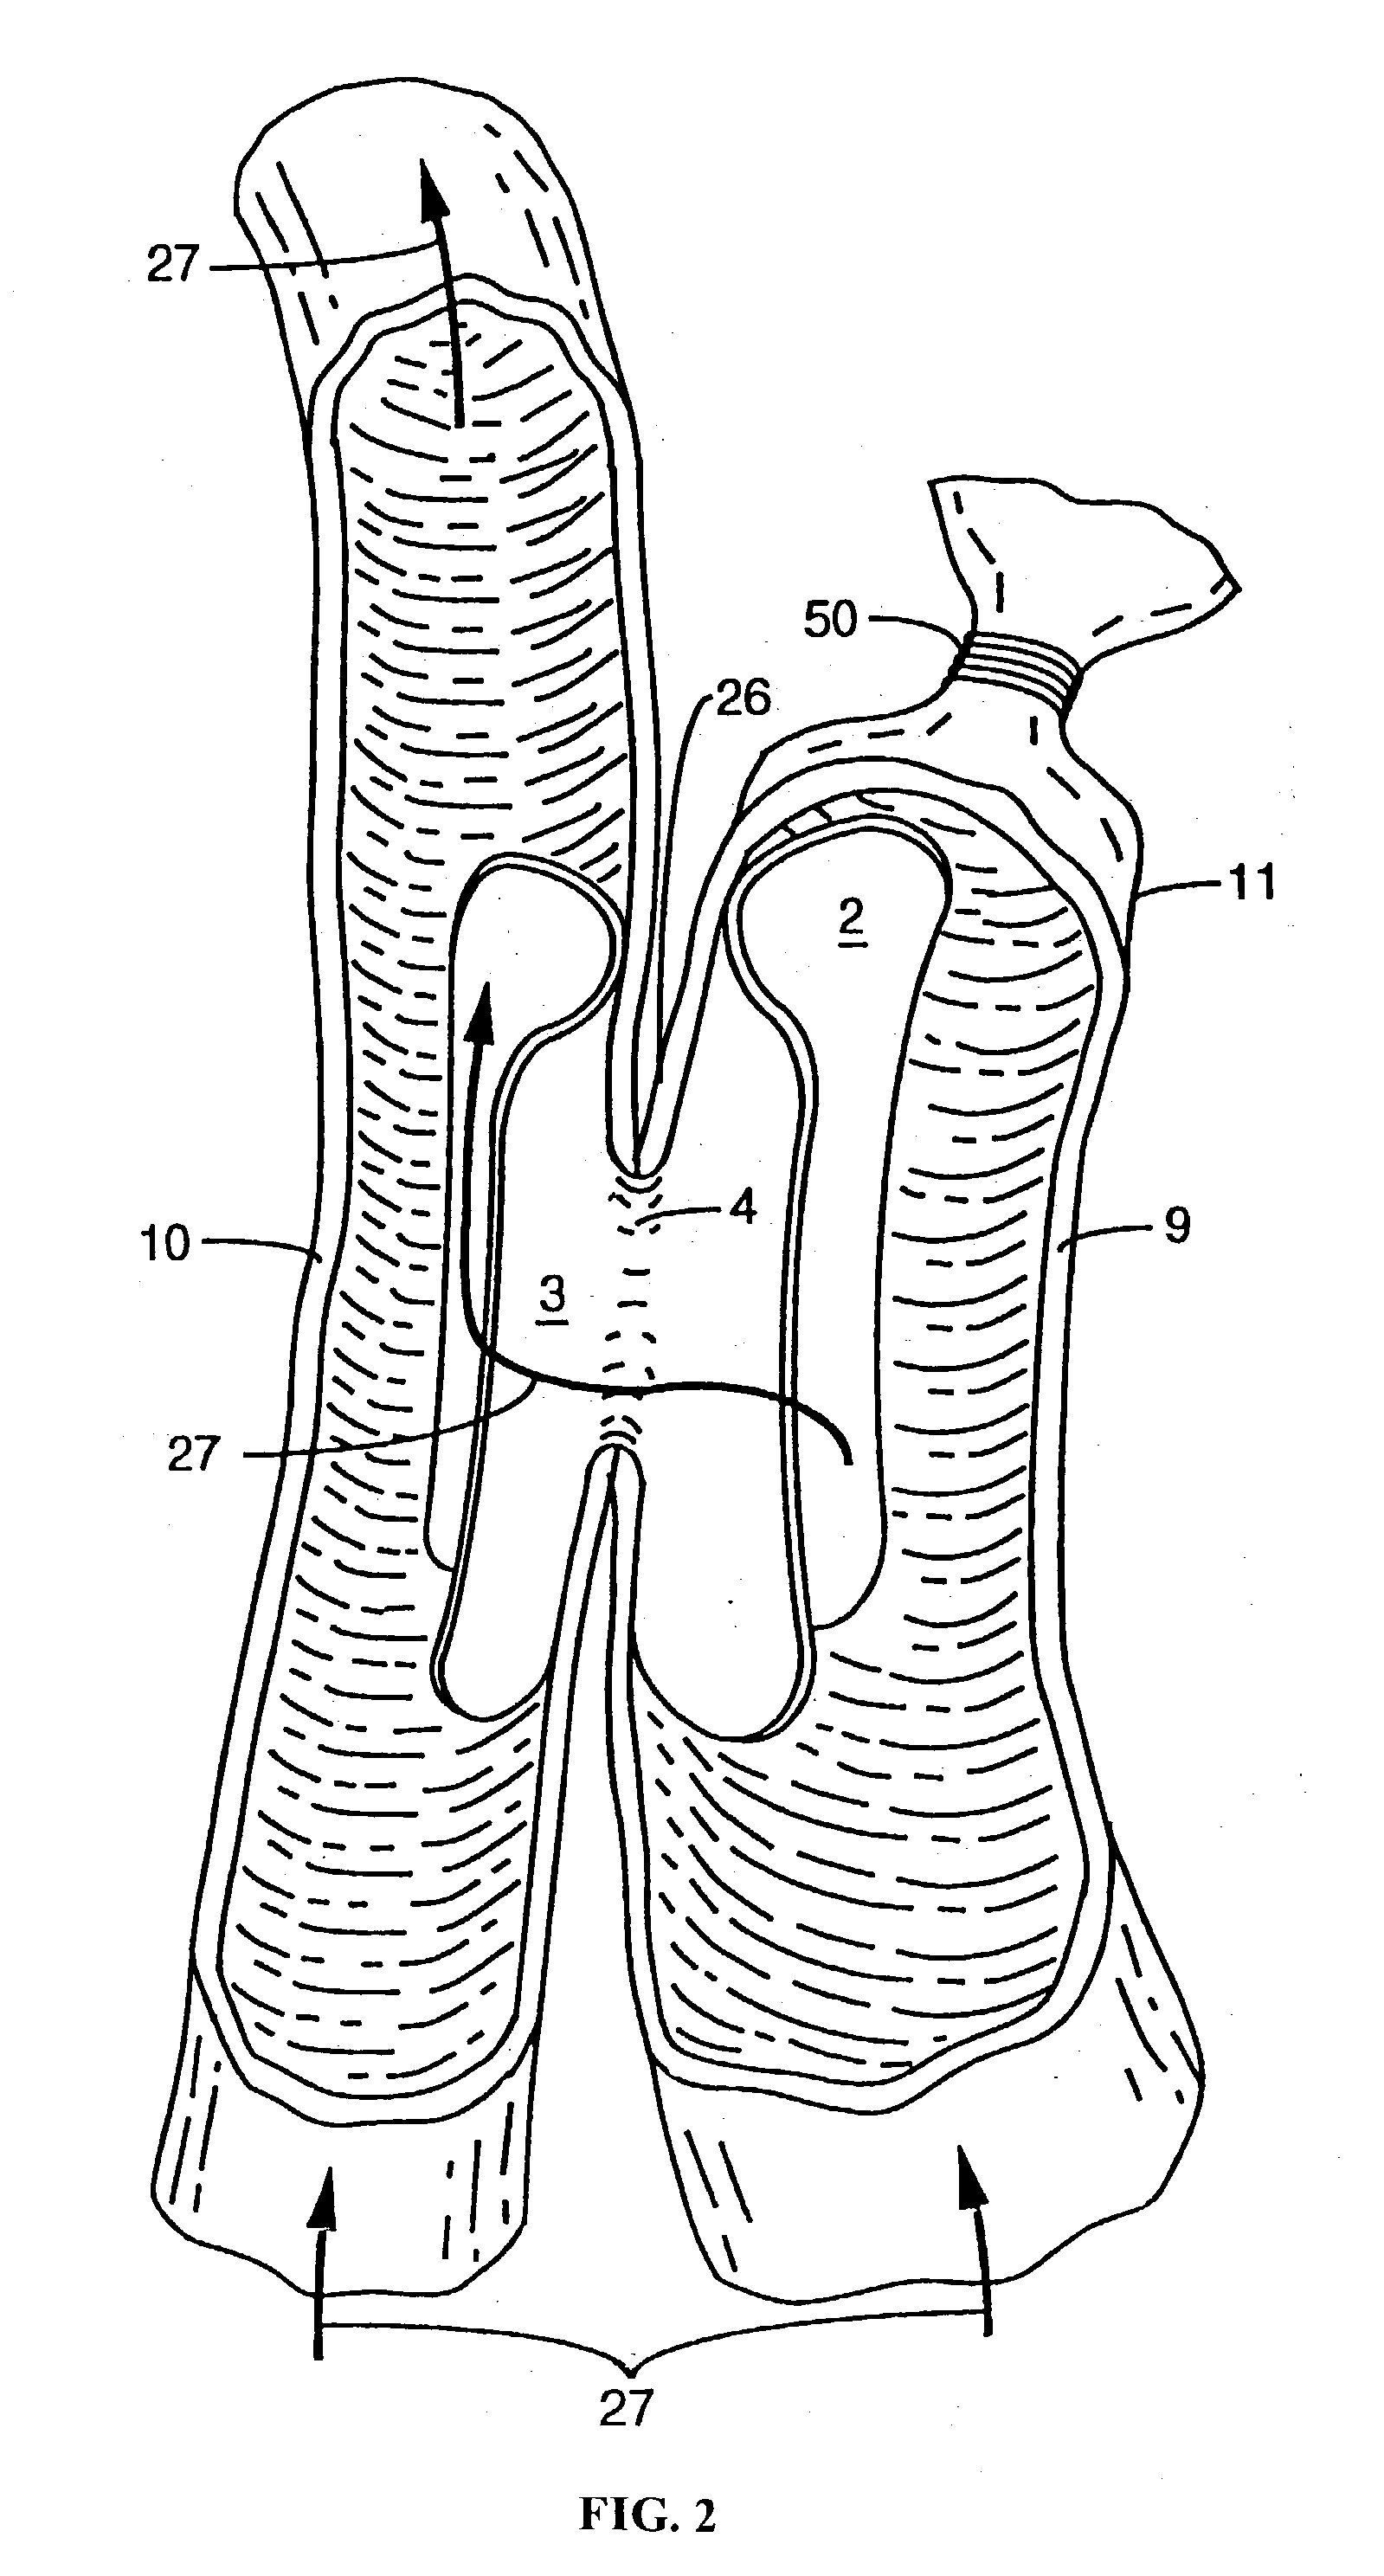 Devices and methods for interconnecting conduits and closing openings in tissue